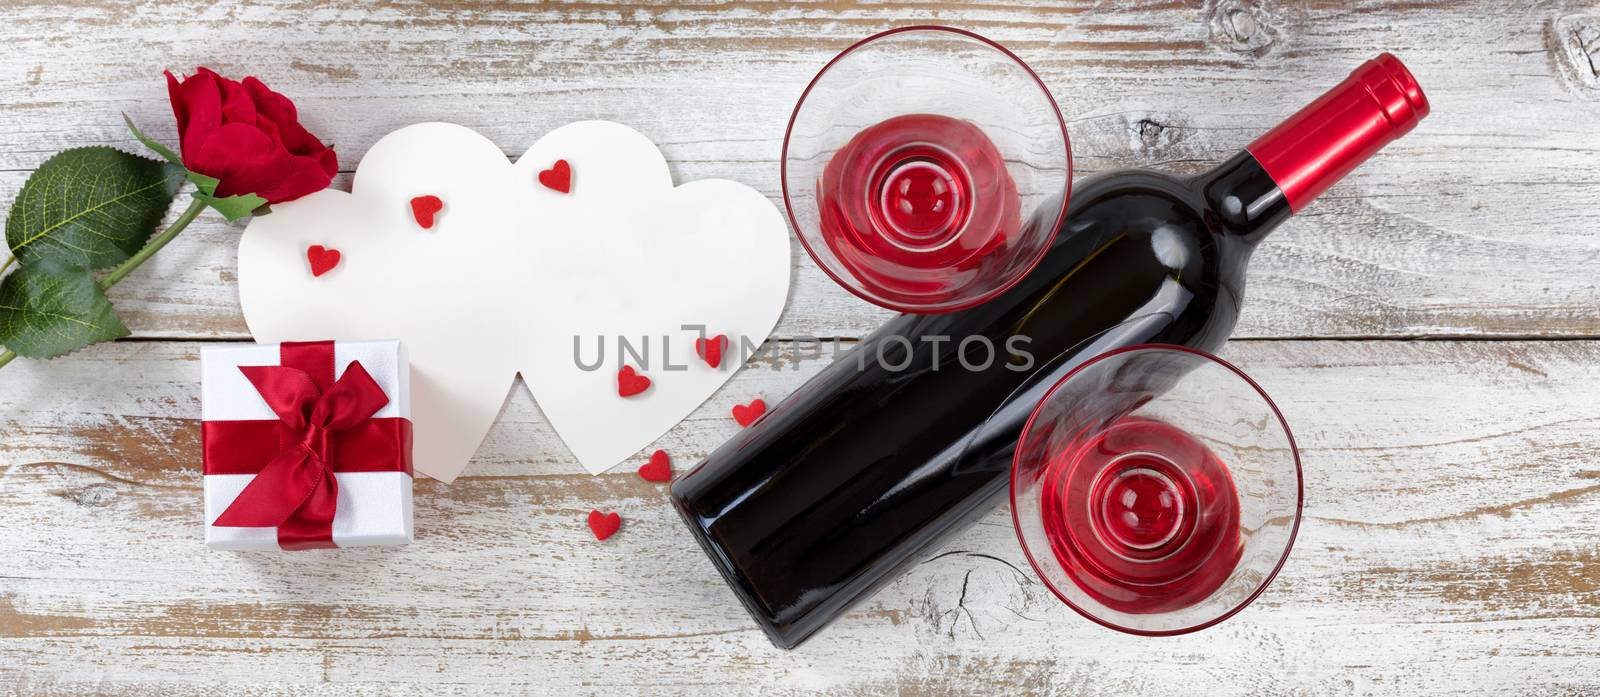 Valentines card, gift, wine and single rose on rustic white wood in flat lay view